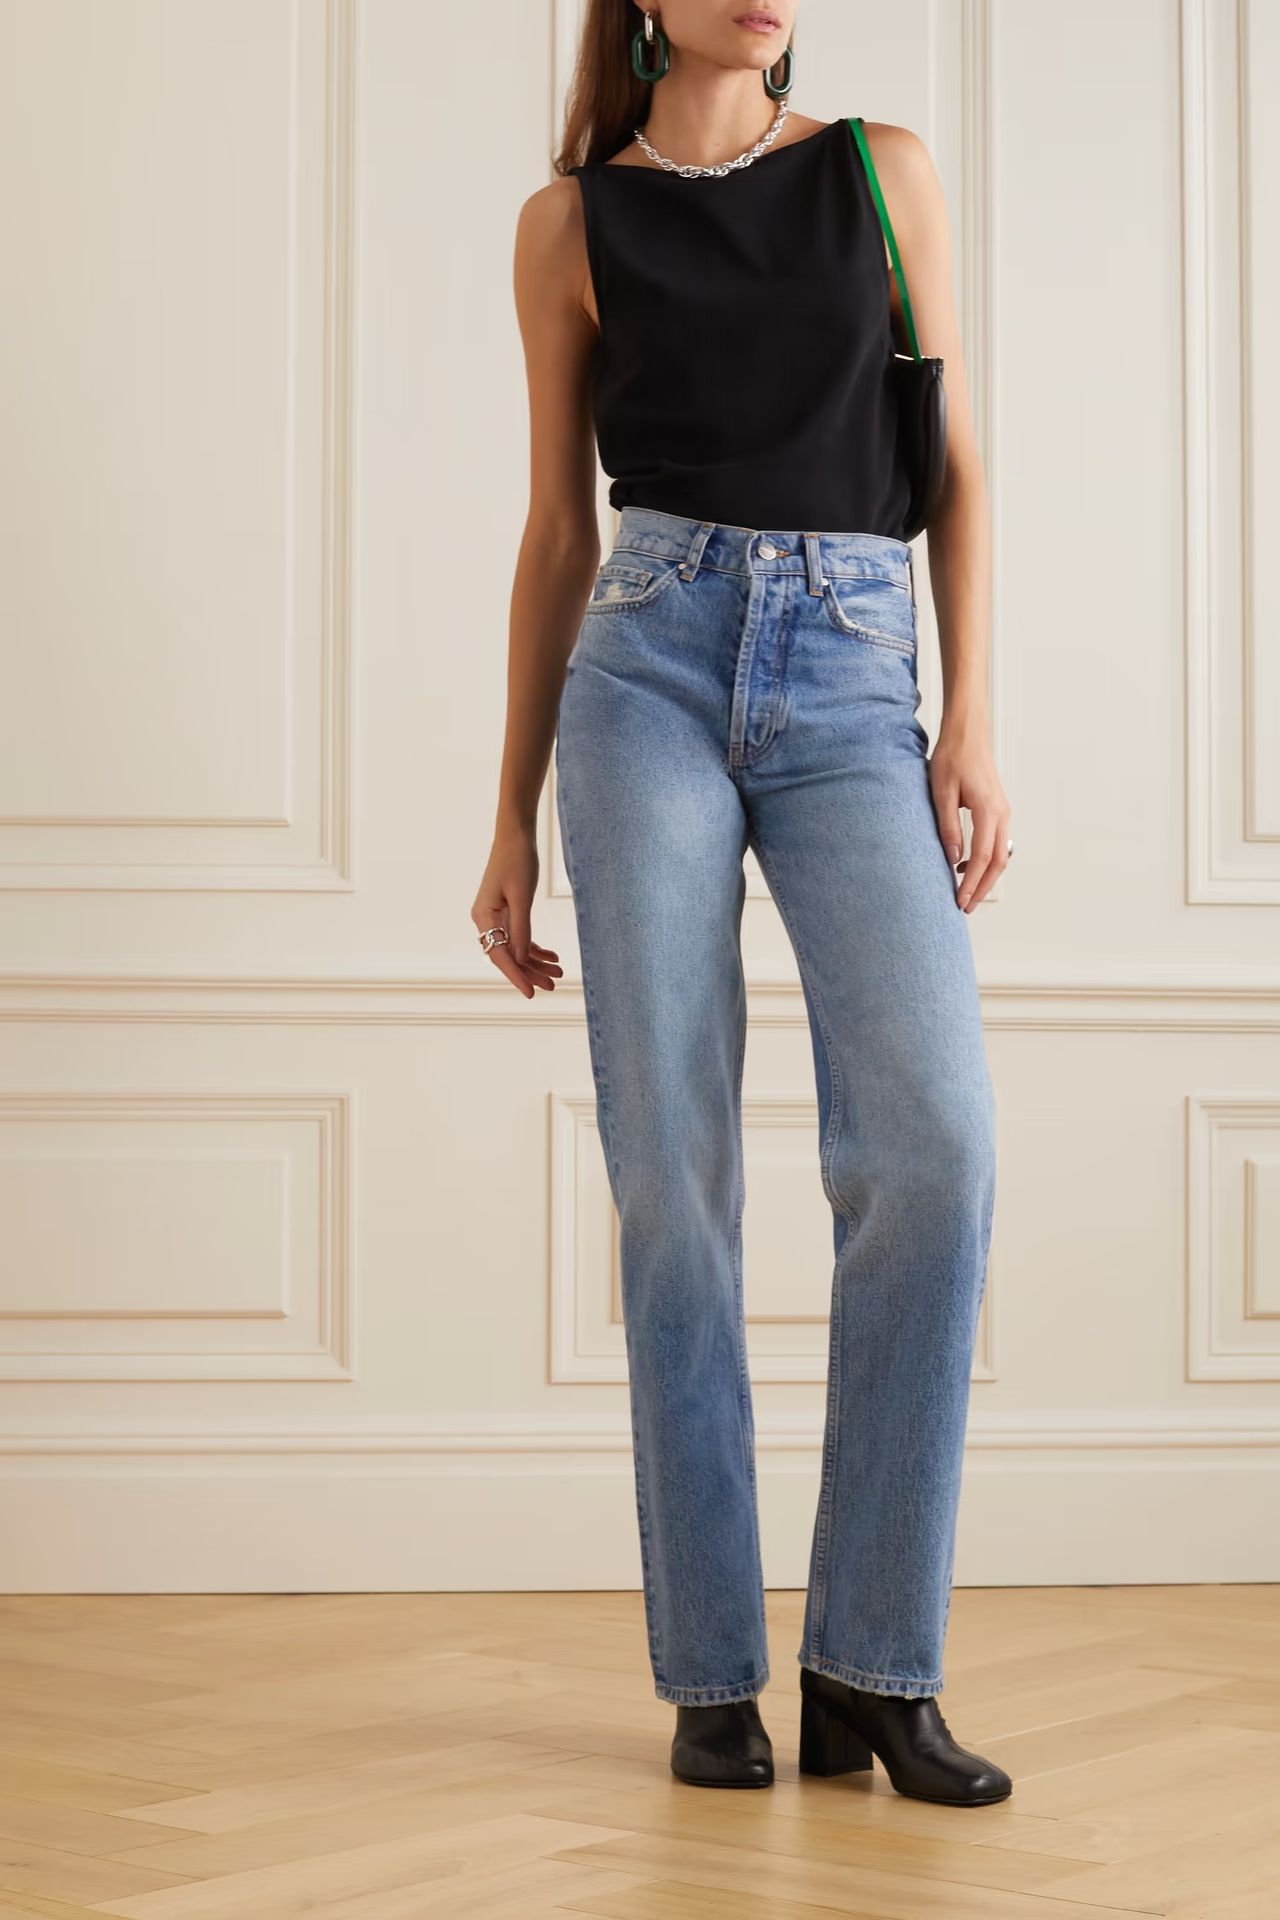 The 5 Best Jeans to Wear With Cowboy Boots for Women | Who What Wear